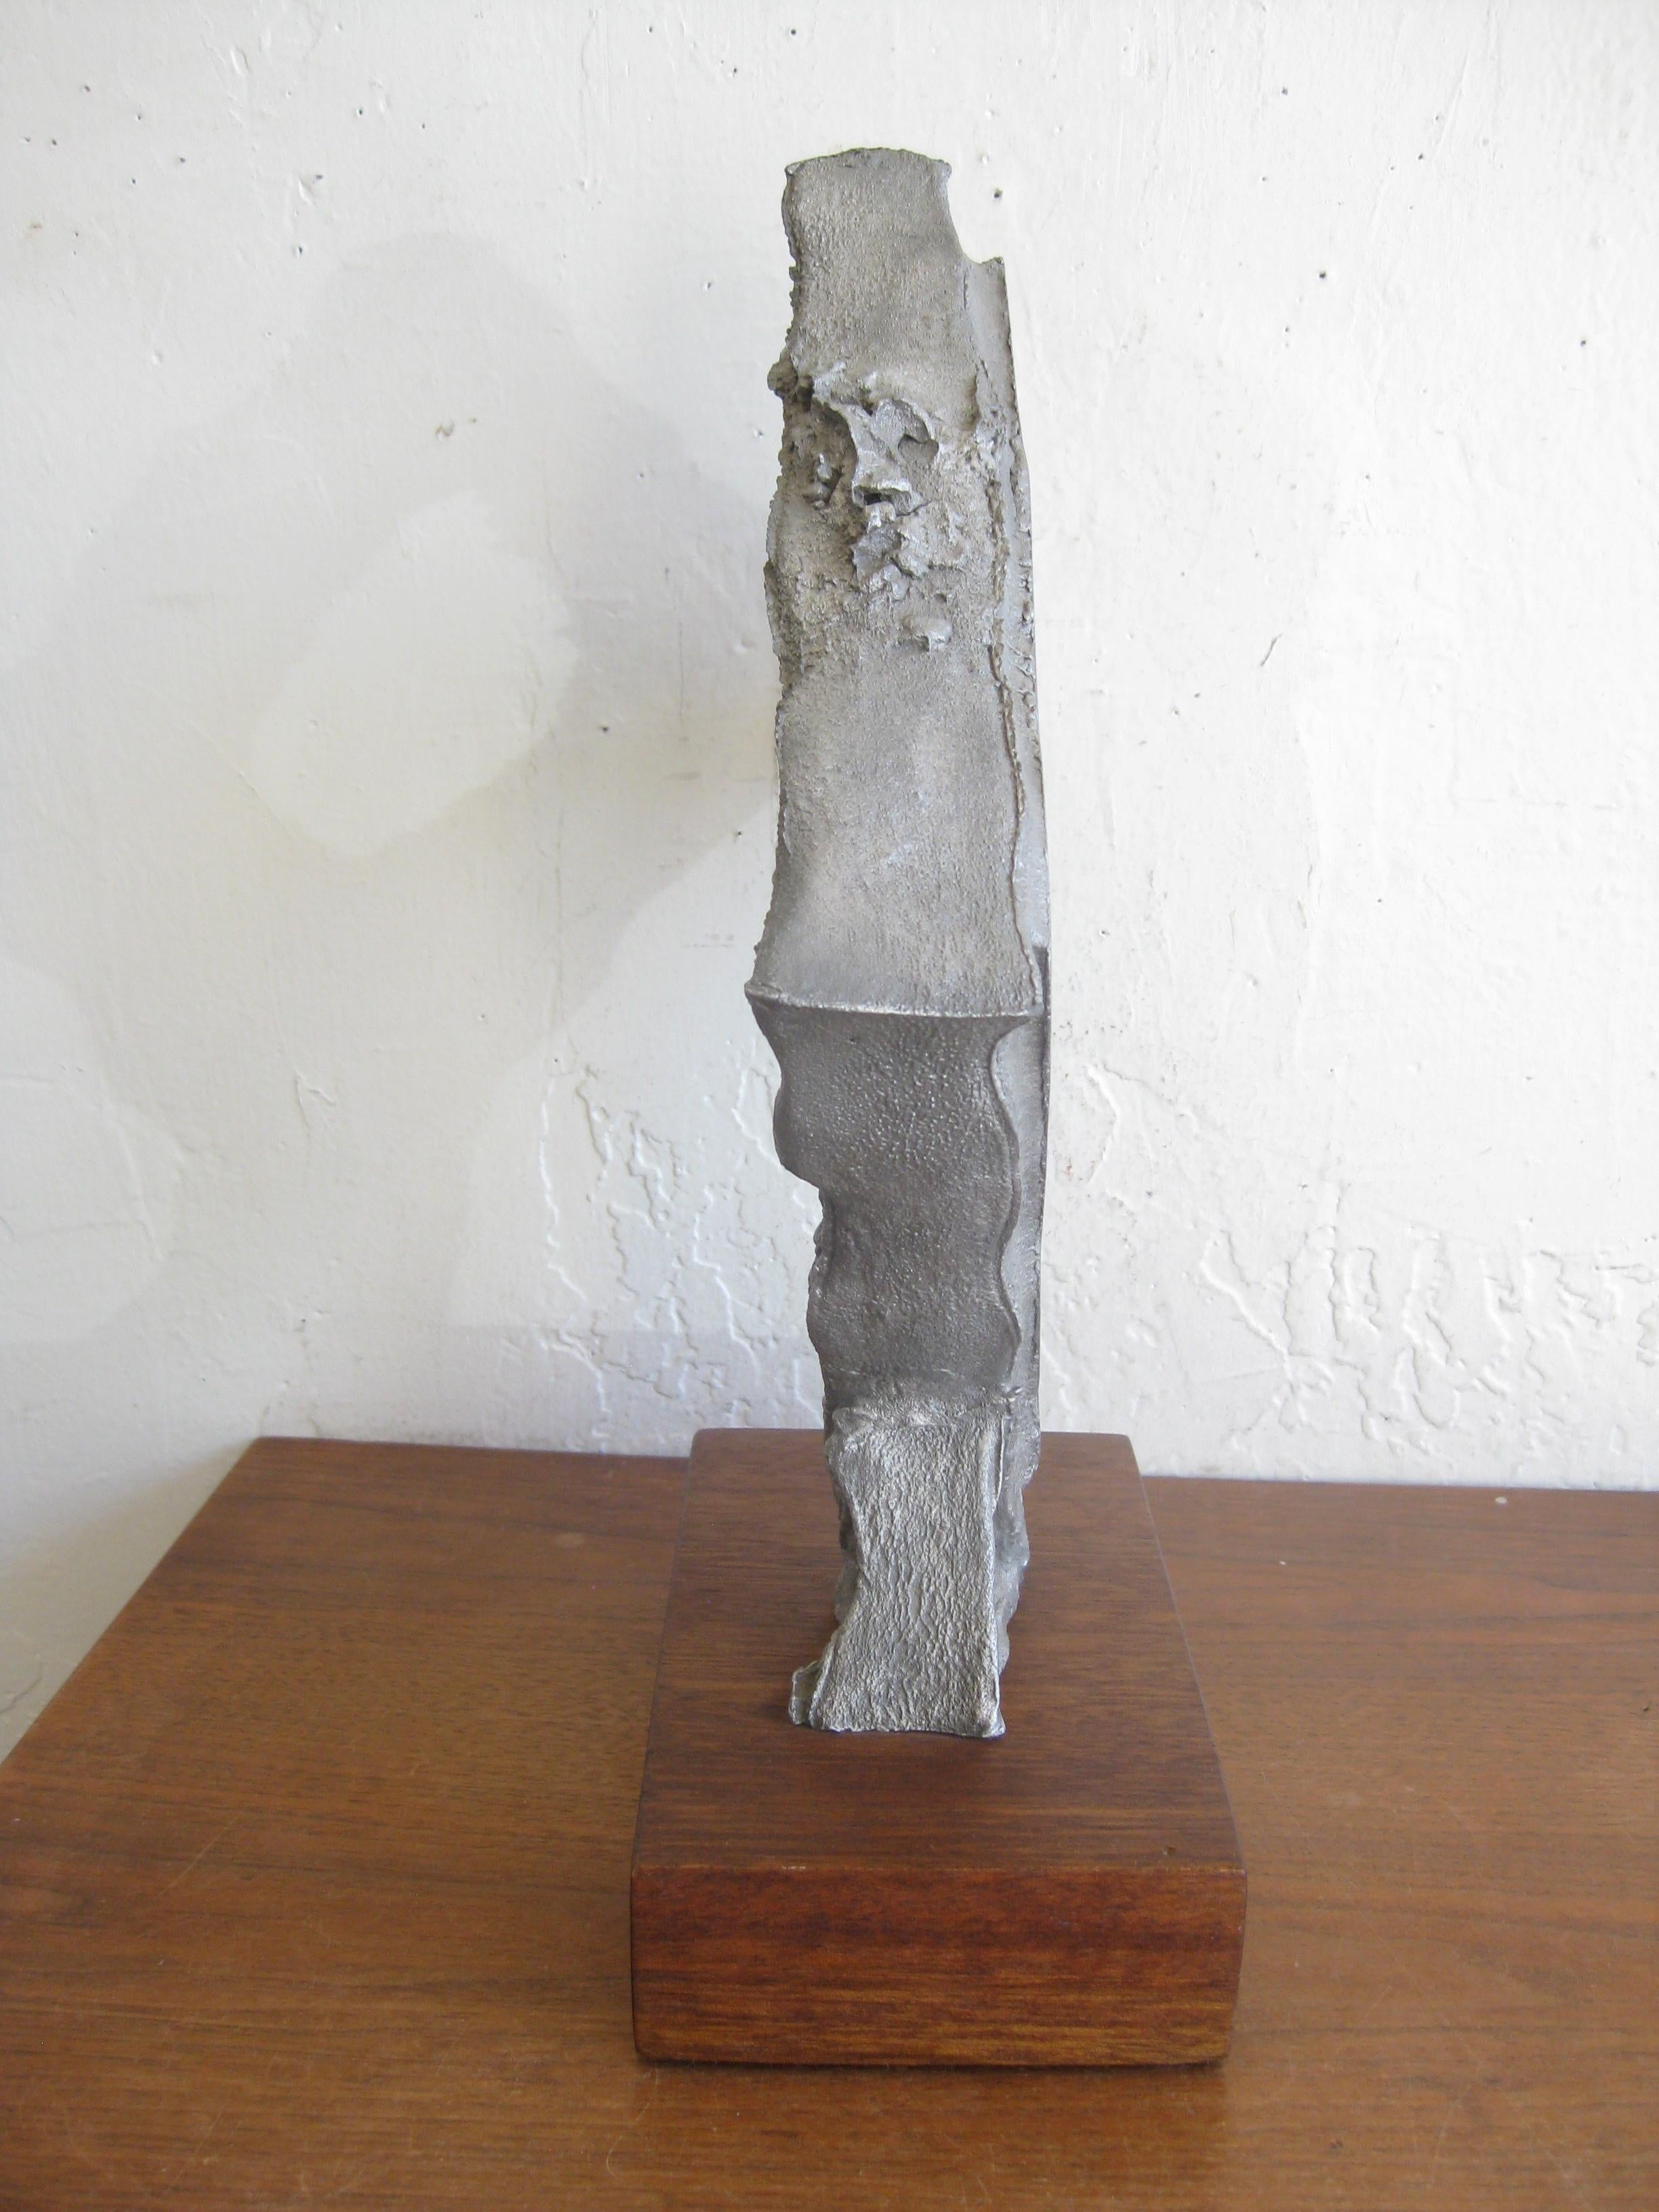 Midcentury Brutalist Abstract Cast Aluminum Sculpture Manner of Donald Drumm In Excellent Condition For Sale In San Diego, CA